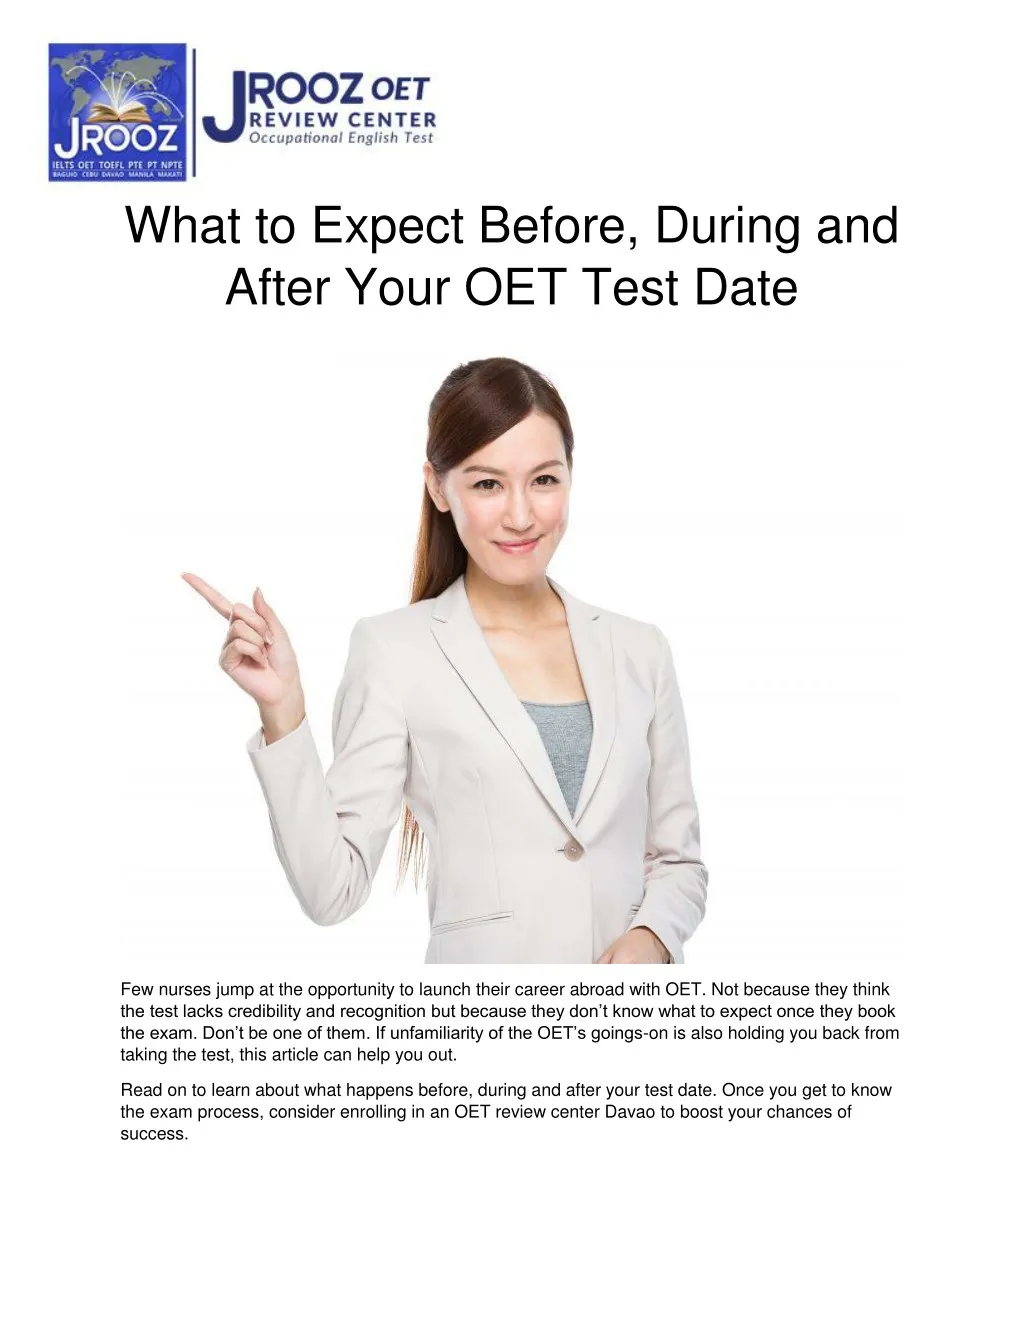 what to expect before during and after your